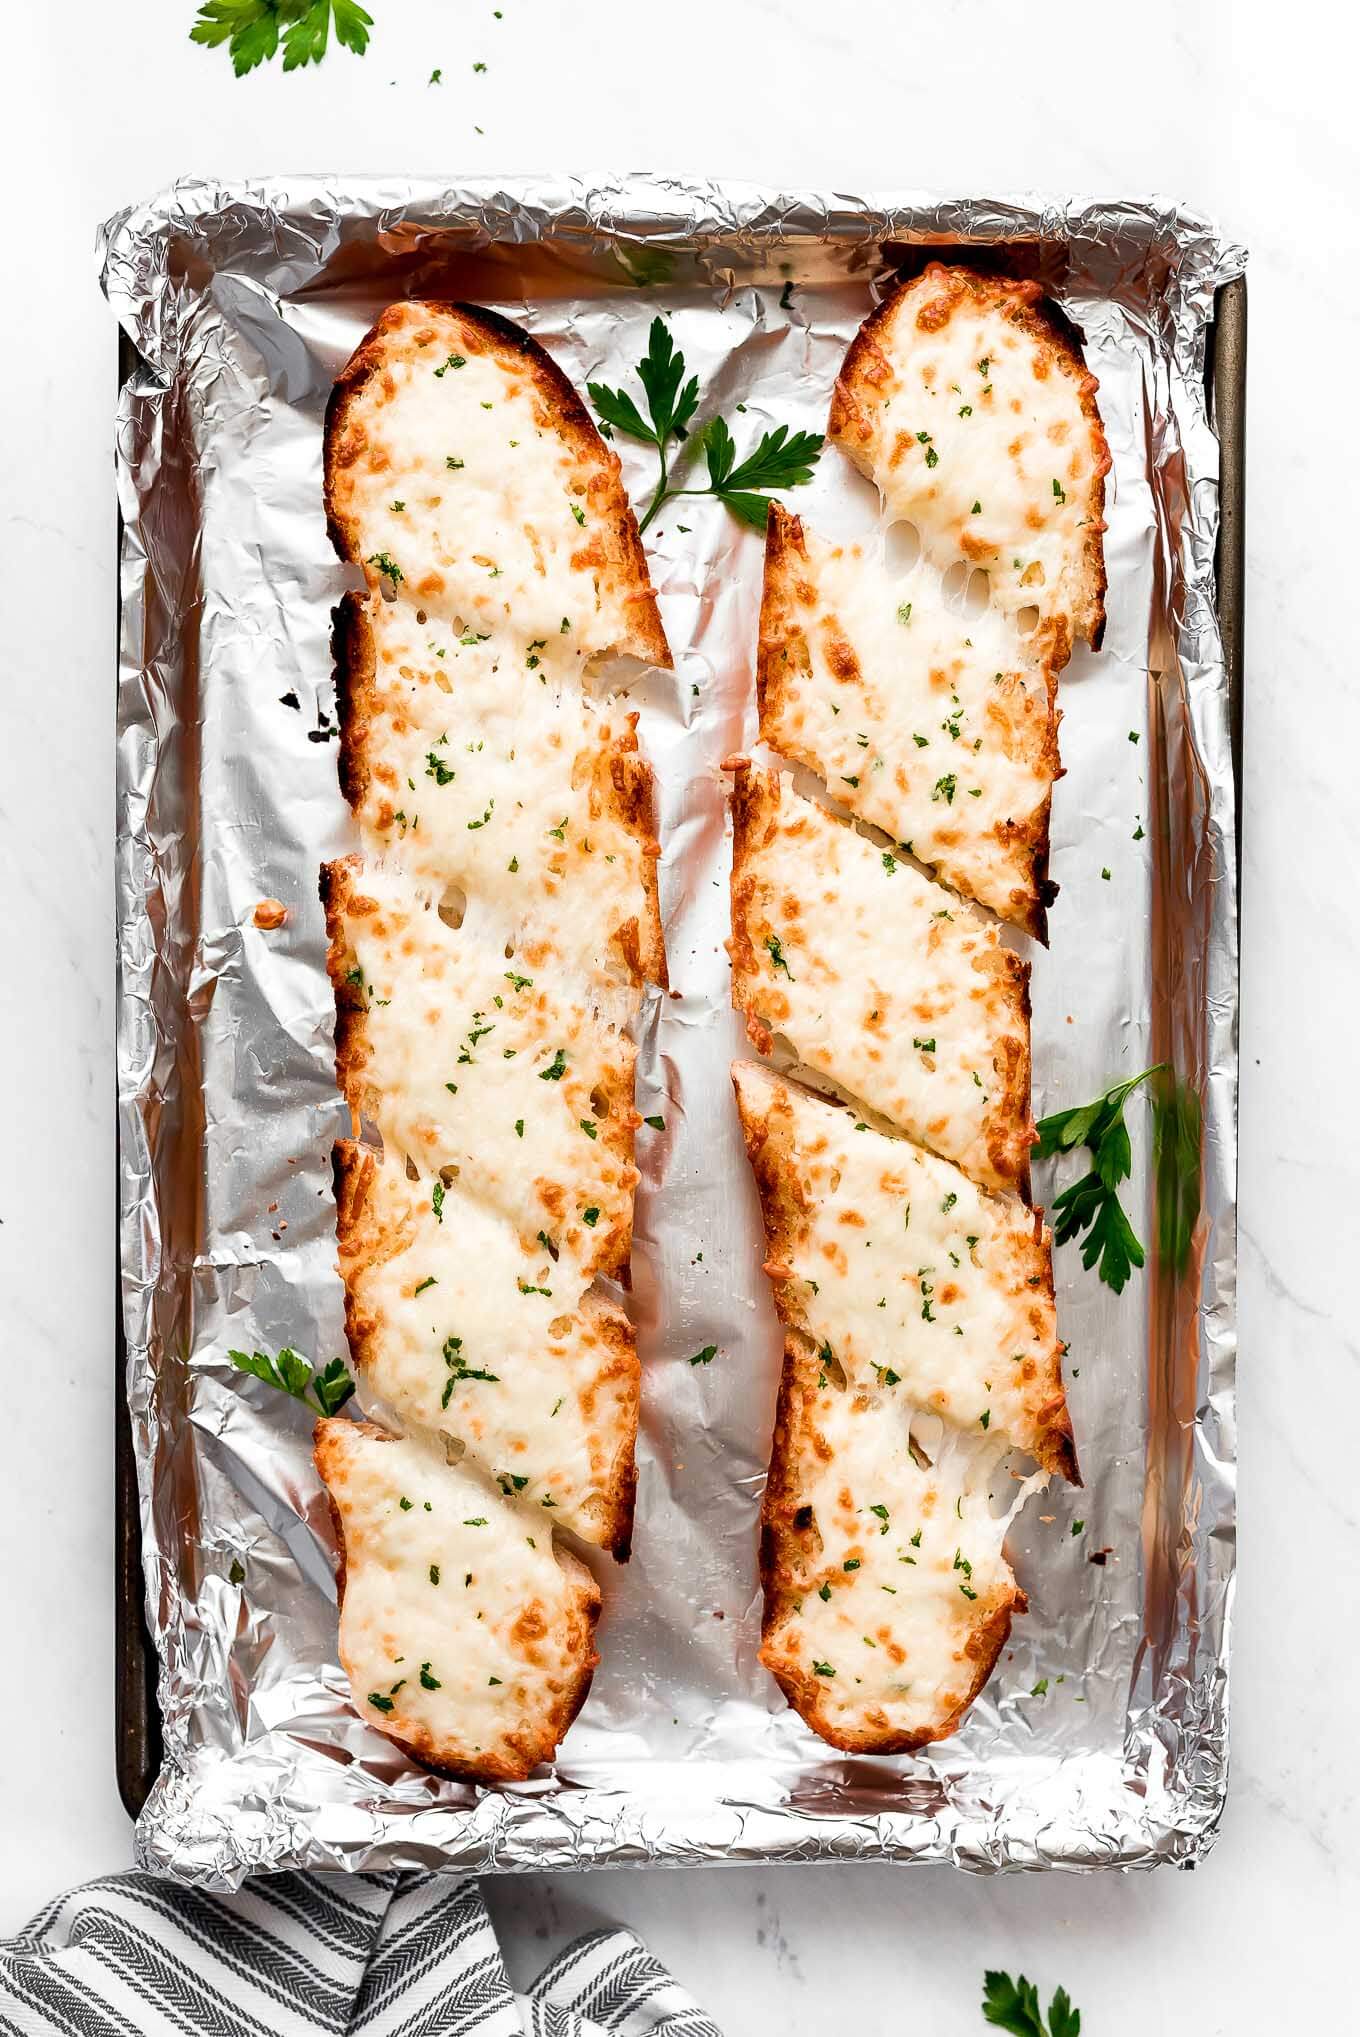 Two loafs of cheesy garlic bread baked until golden.